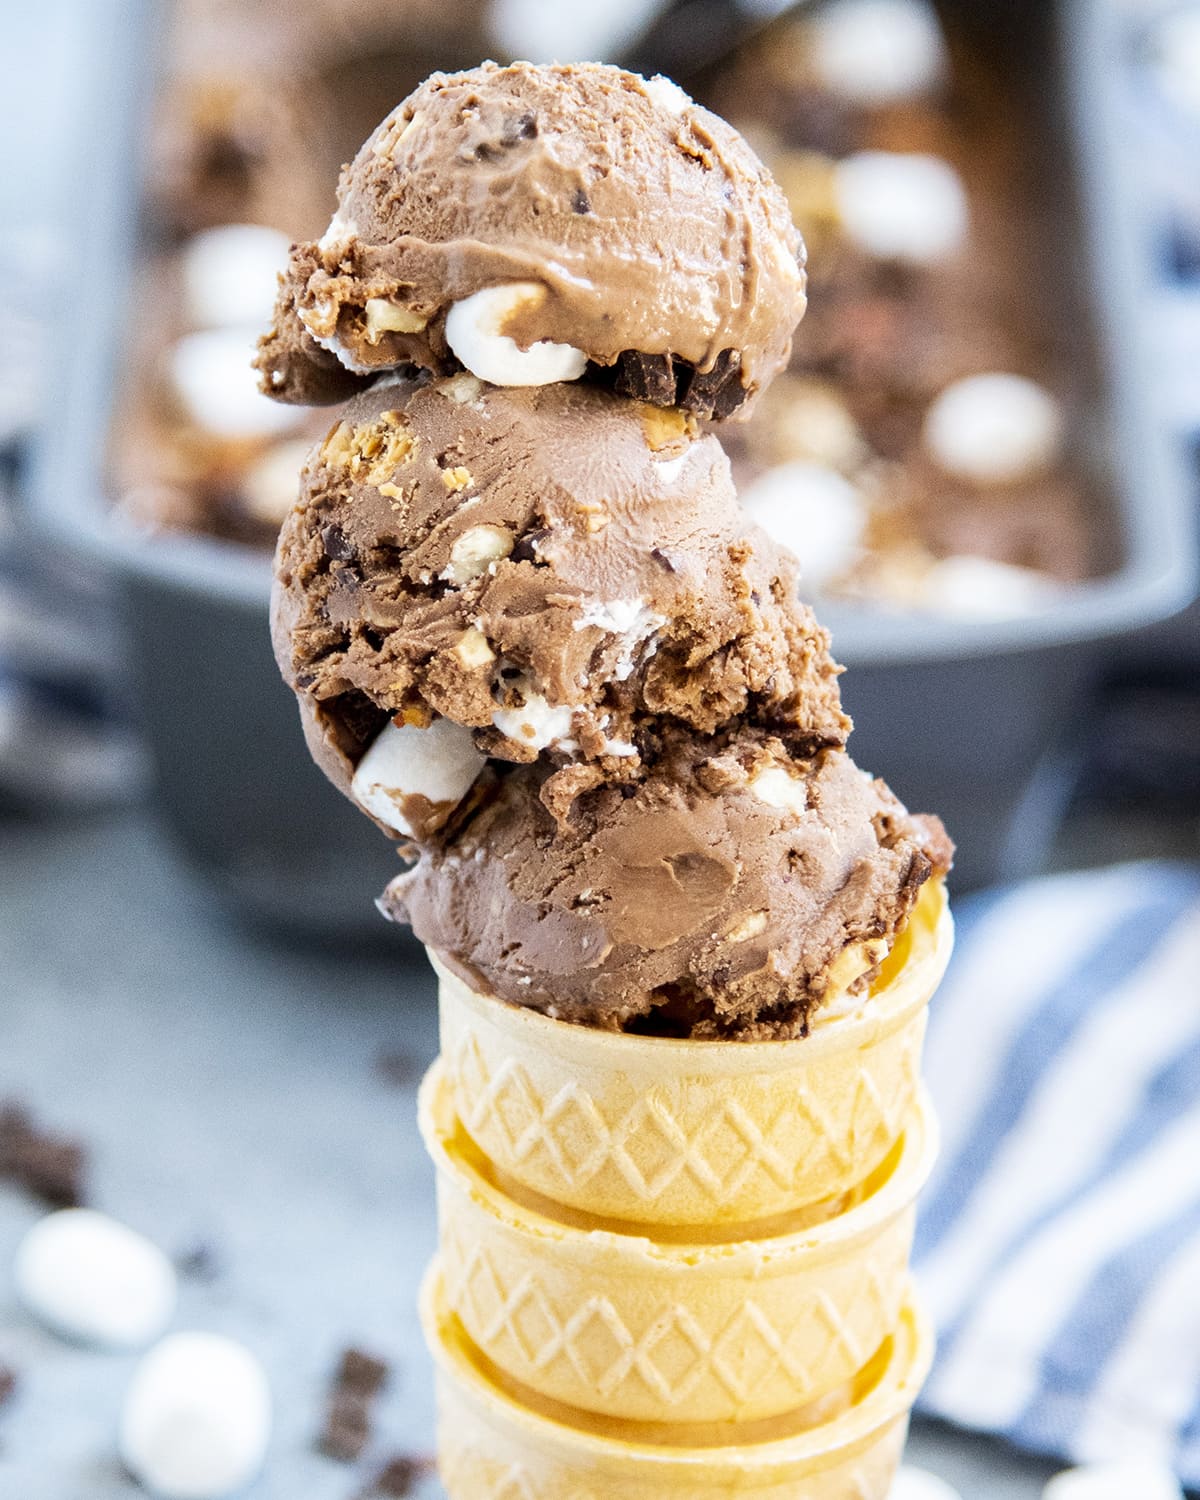 an ice cream cone topped with three scoops of rocky road ice cream.